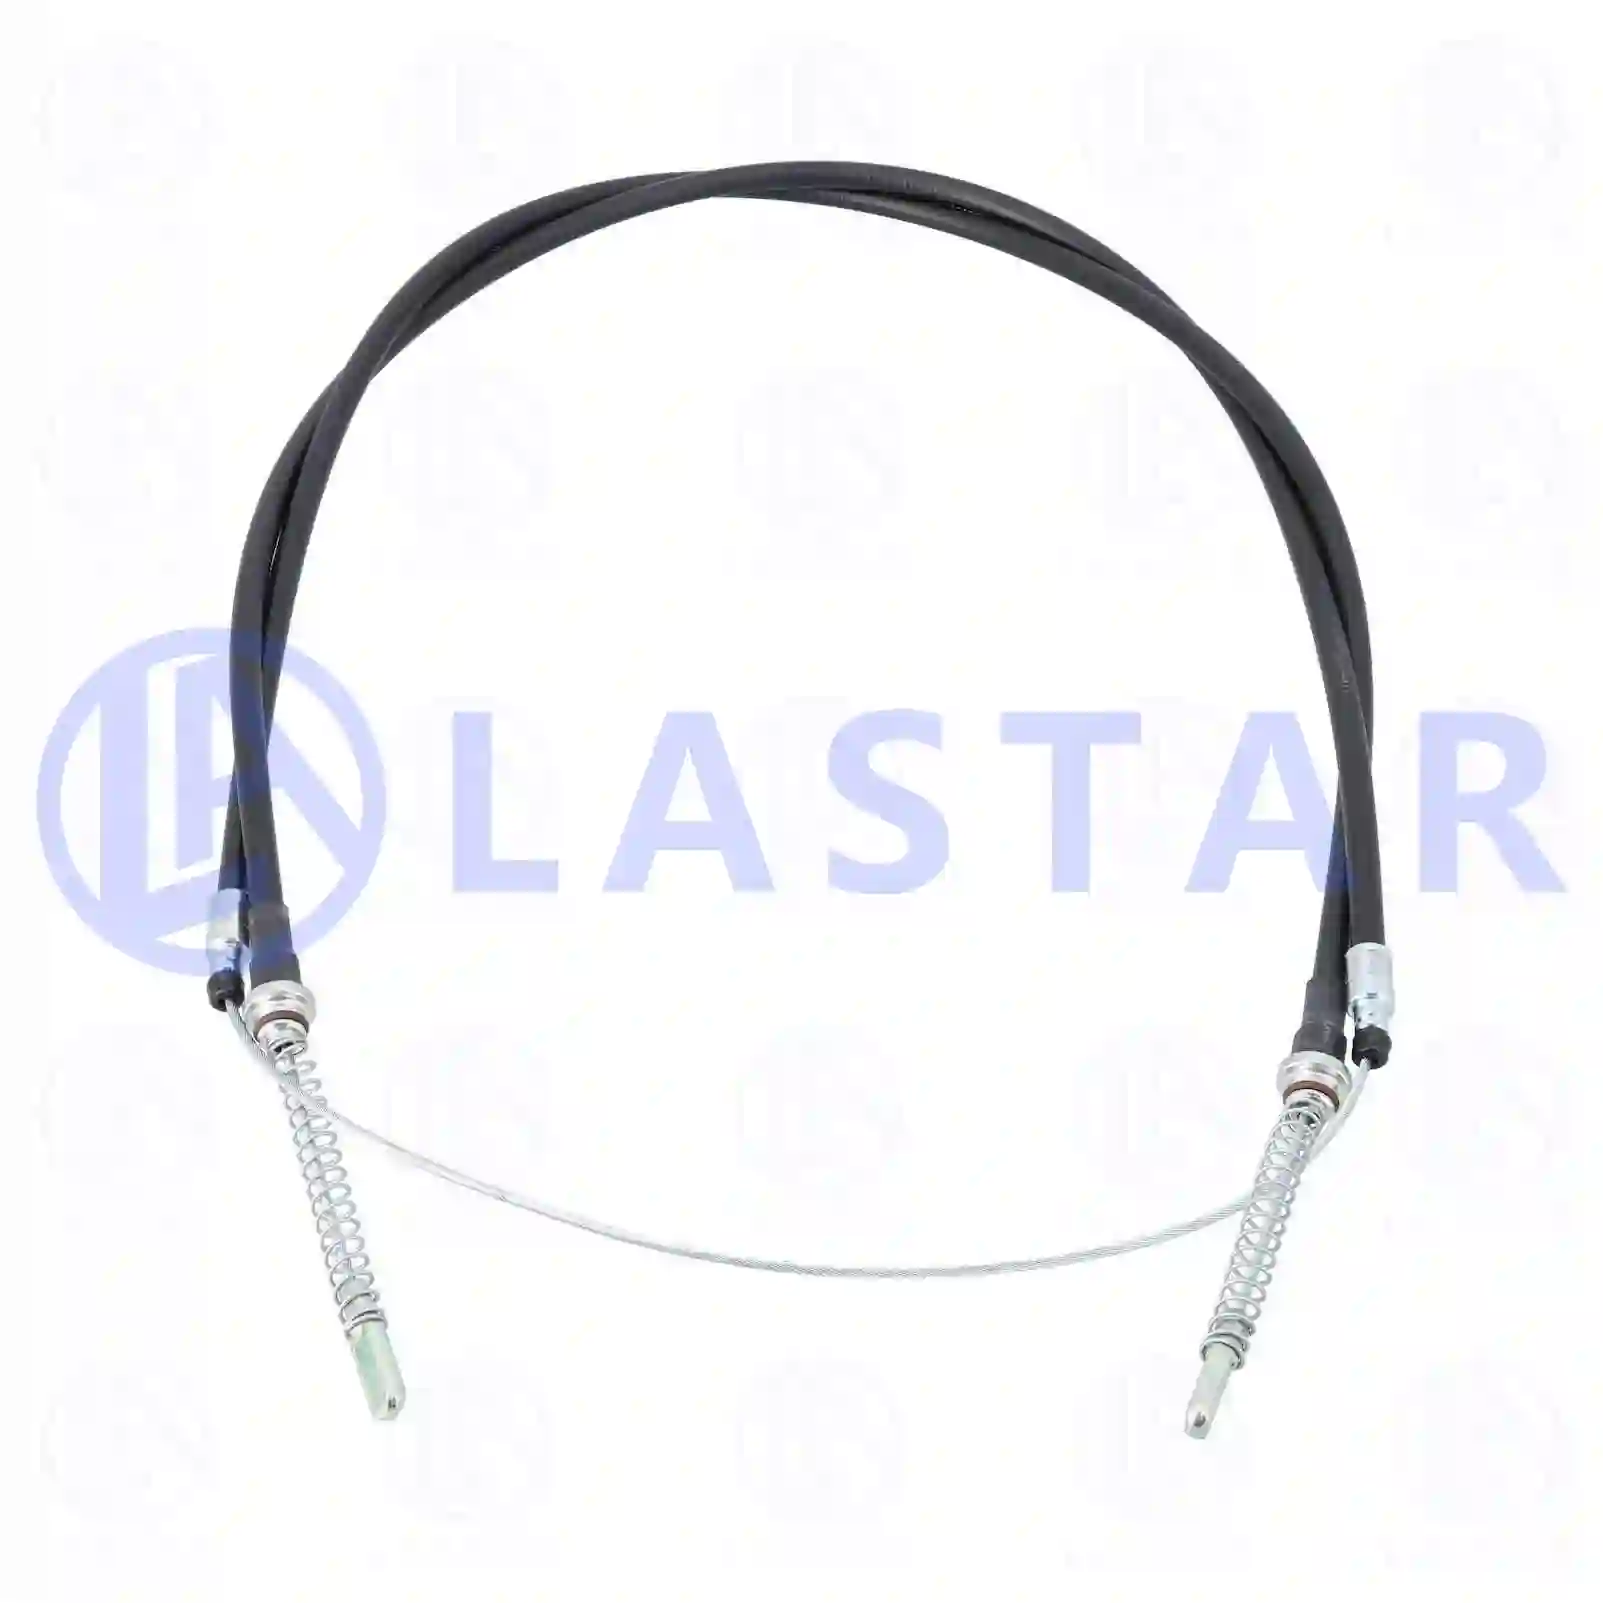 Bowden cable, parking brake, 77717036, 99434589, 9943458 ||  77717036 Lastar Spare Part | Truck Spare Parts, Auotomotive Spare Parts Bowden cable, parking brake, 77717036, 99434589, 9943458 ||  77717036 Lastar Spare Part | Truck Spare Parts, Auotomotive Spare Parts